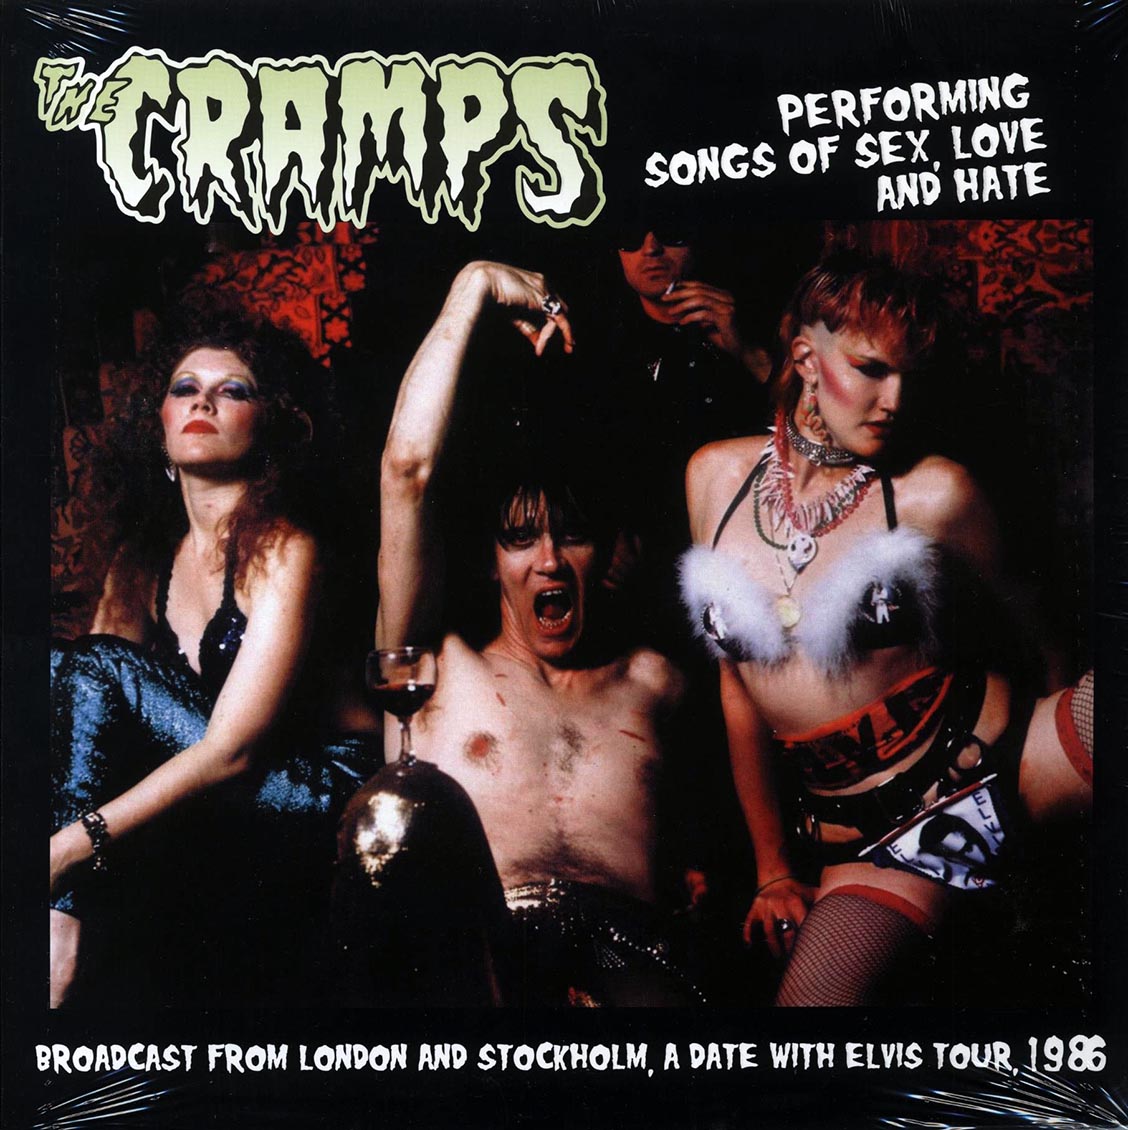 The Cramps - Performing Songs Of Sex, Love And Hate: Broadcast From London And Stockholm, A Date With Elvis Tour, 1986 (ltd. 500 copies made) - Vinyl LP